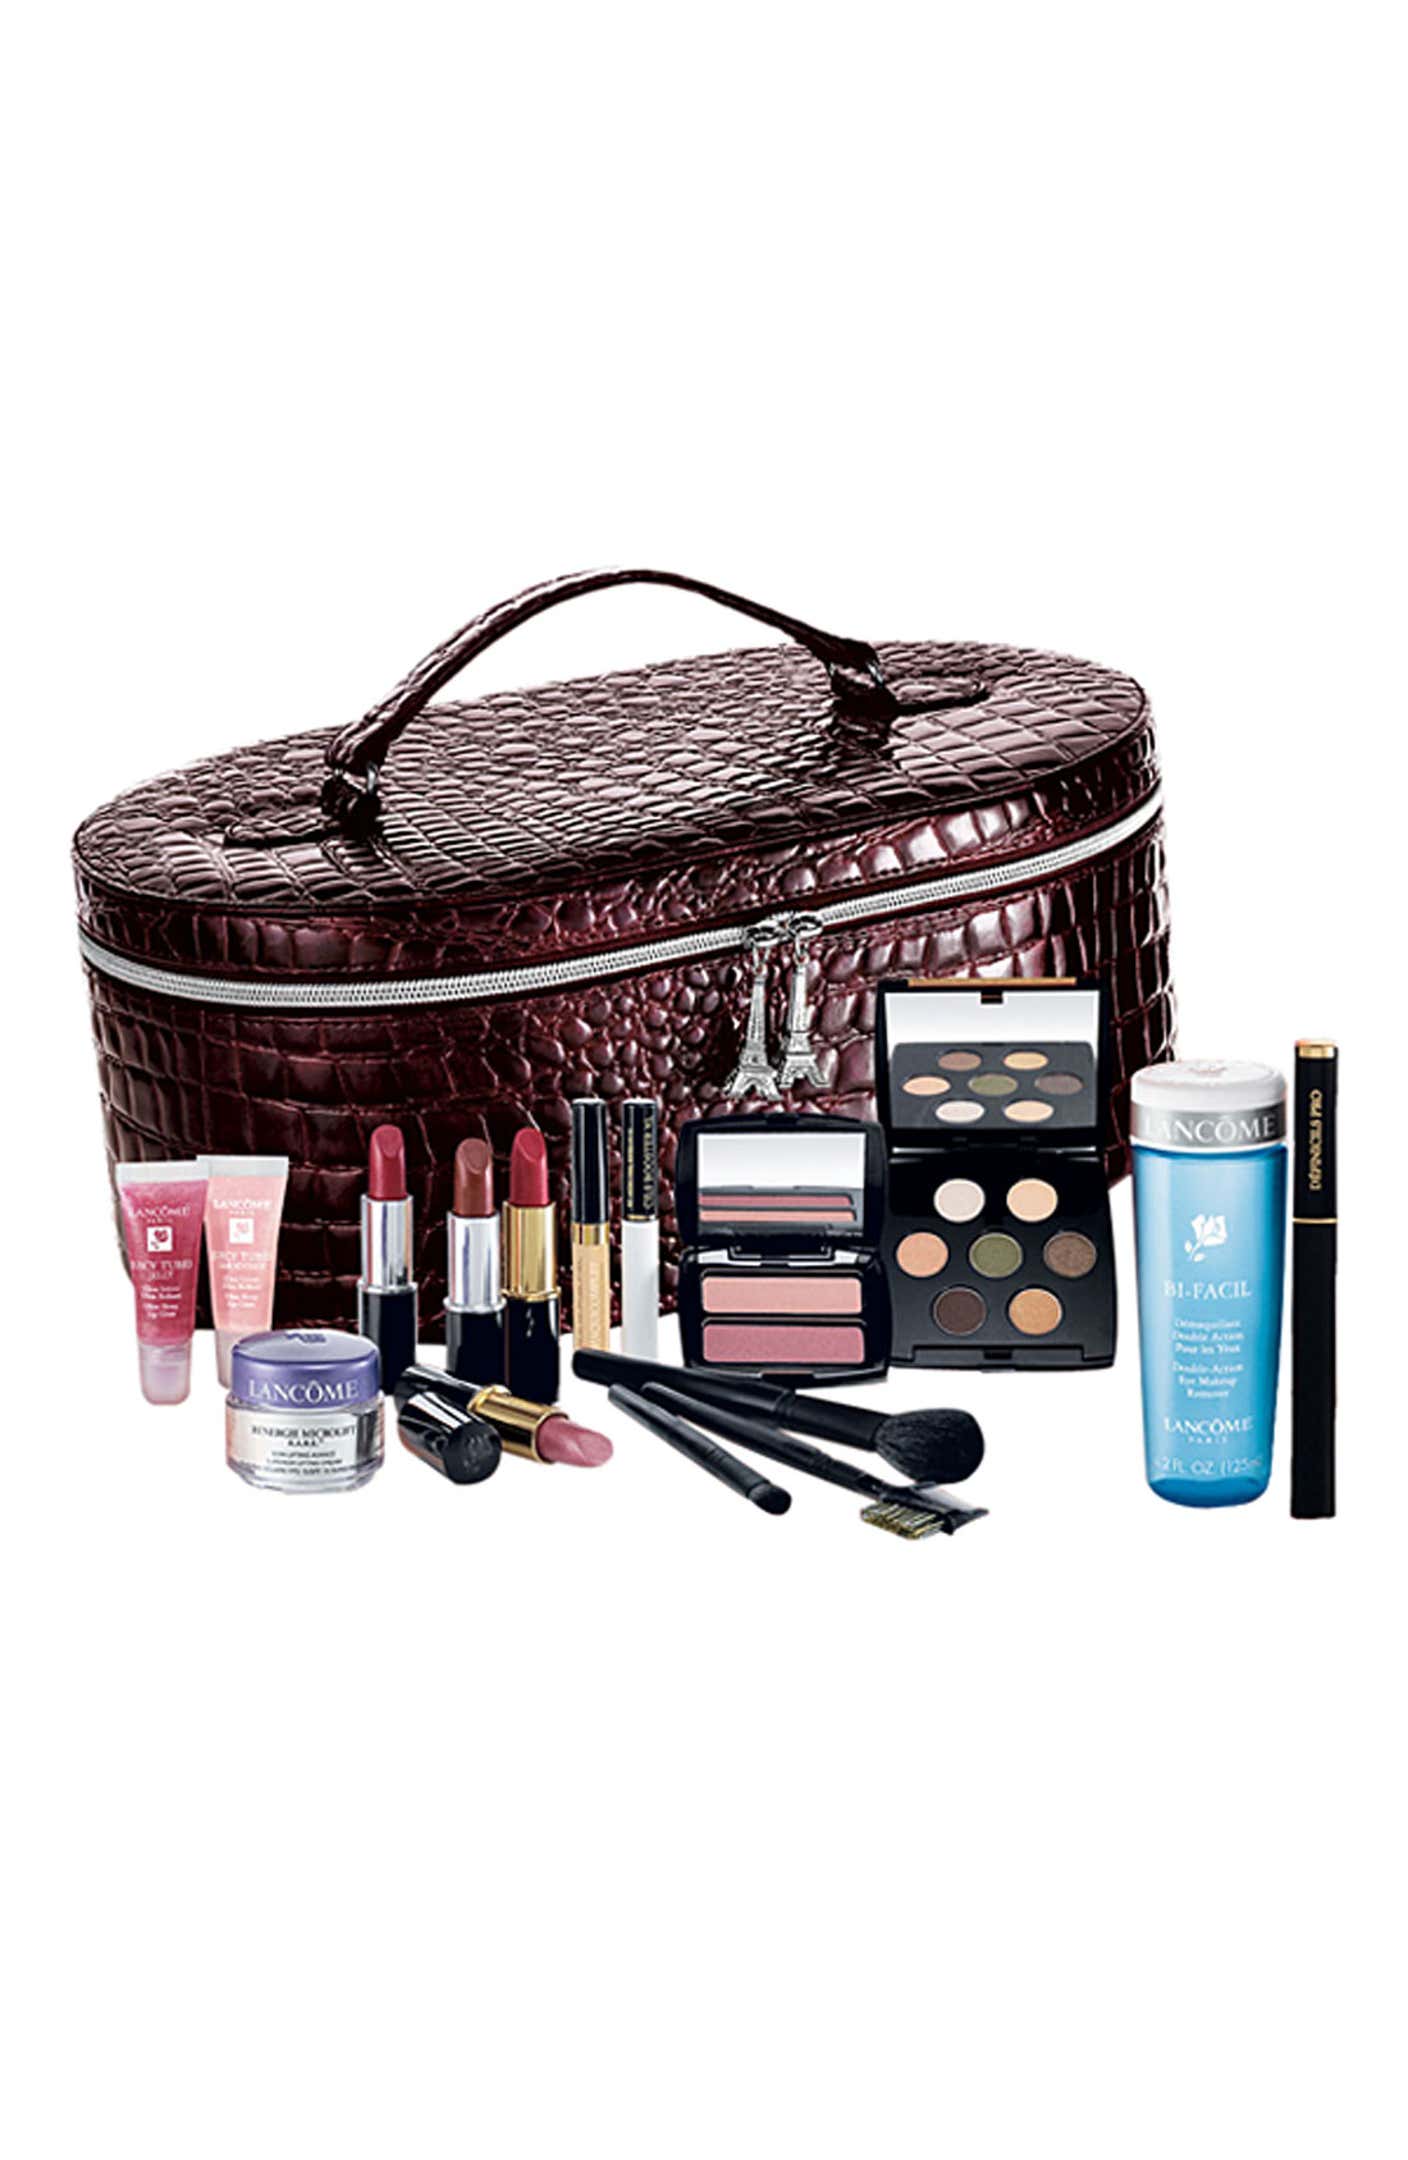 Lancôme 'Holiday Beauty Box' Special Purchase Nordstrom